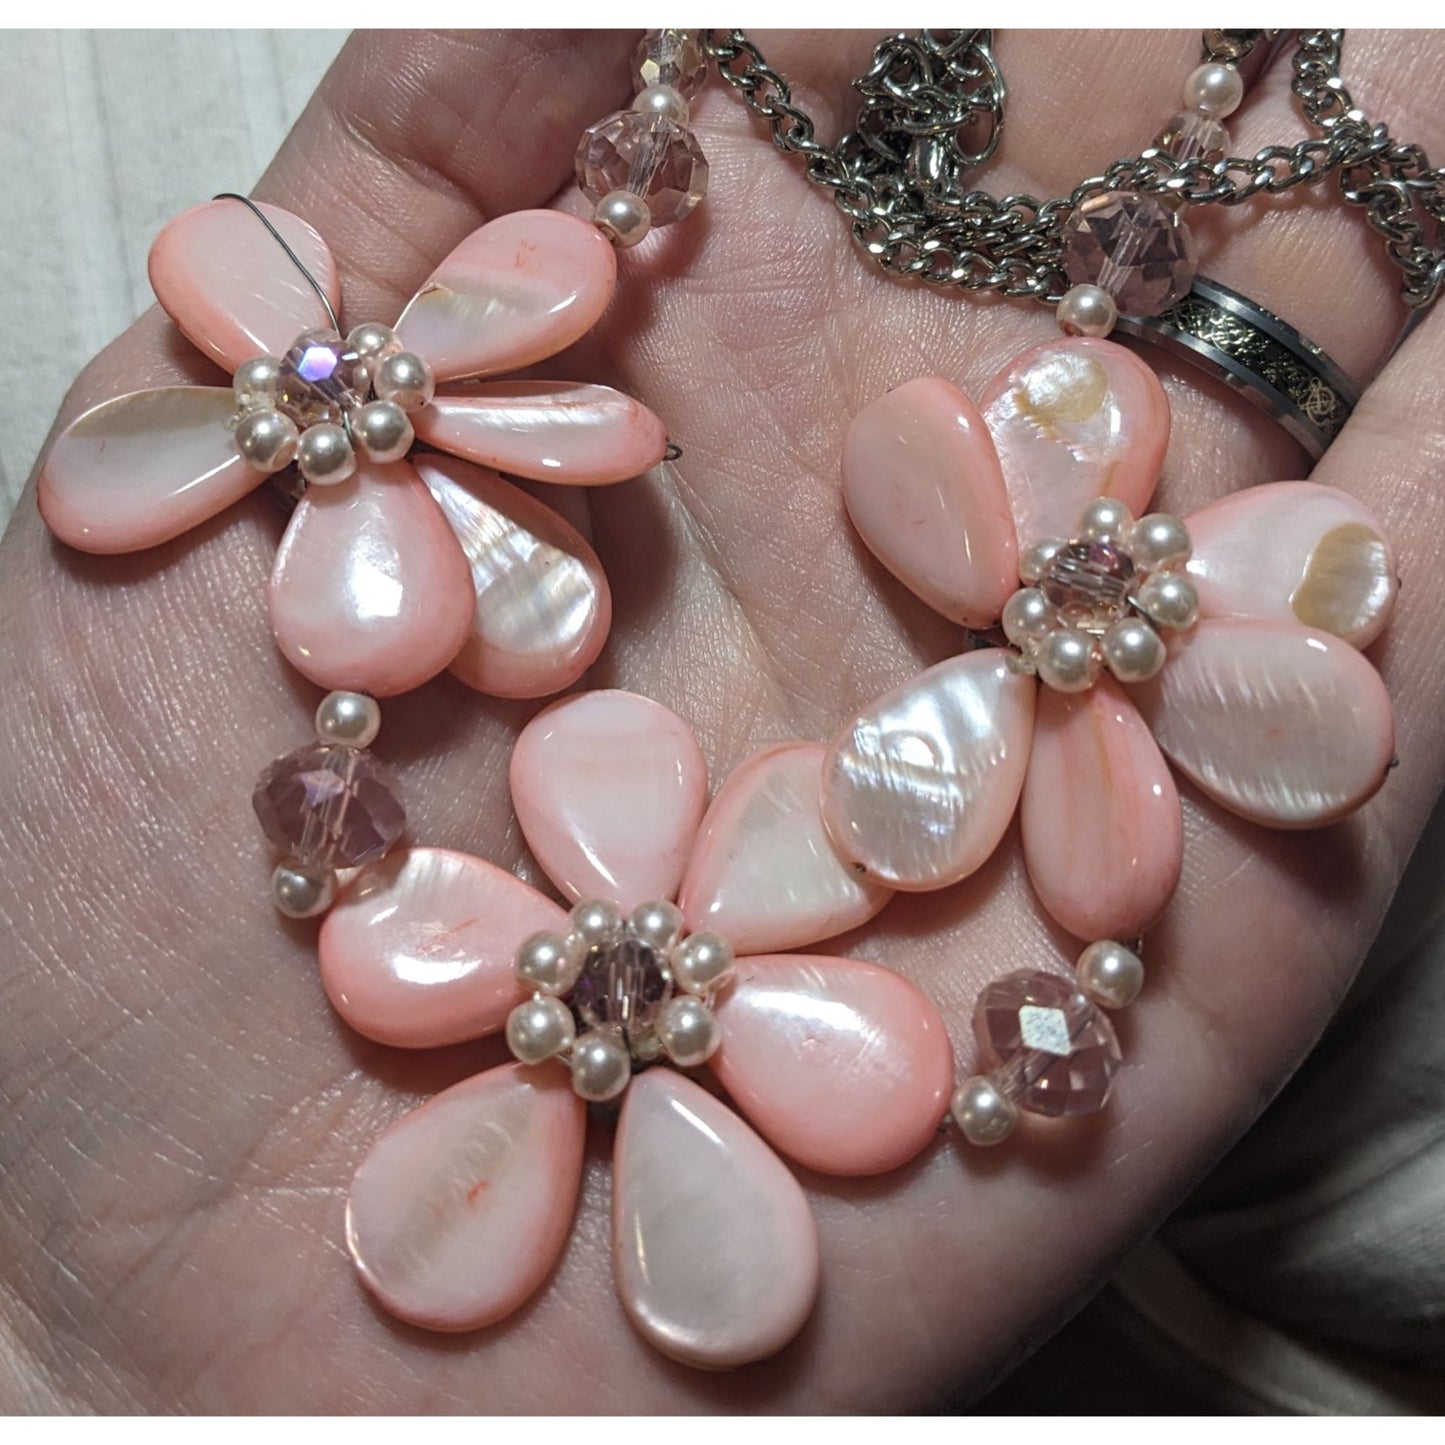 Floral Necklace With Pink Shell Beads & Pearls